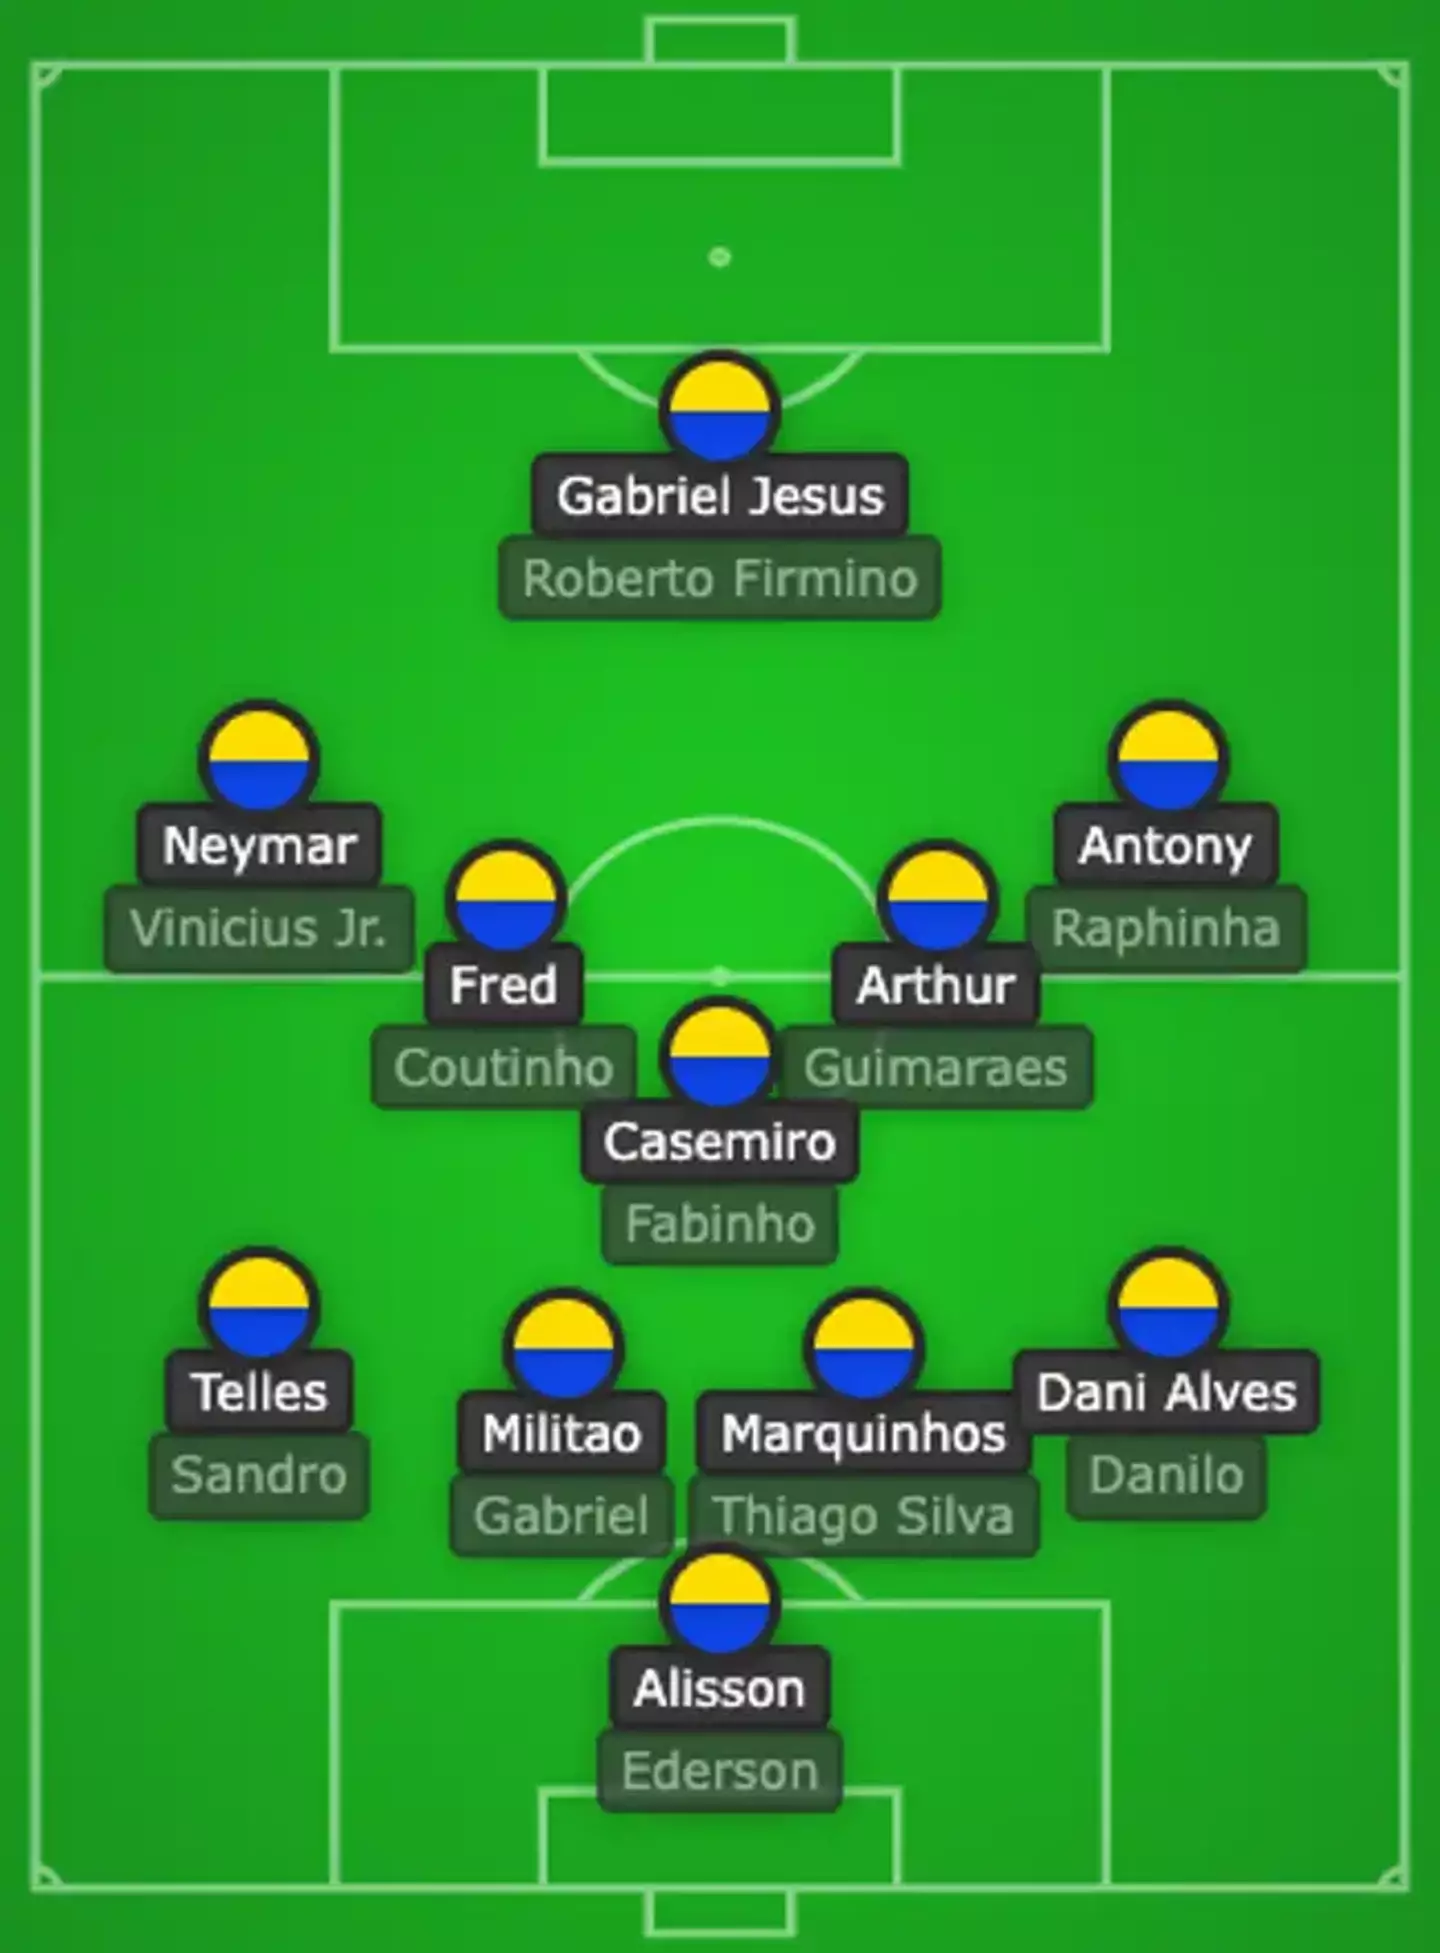 Tite's side are another heavy favourite for the World Cup this summer. And you can see why. 